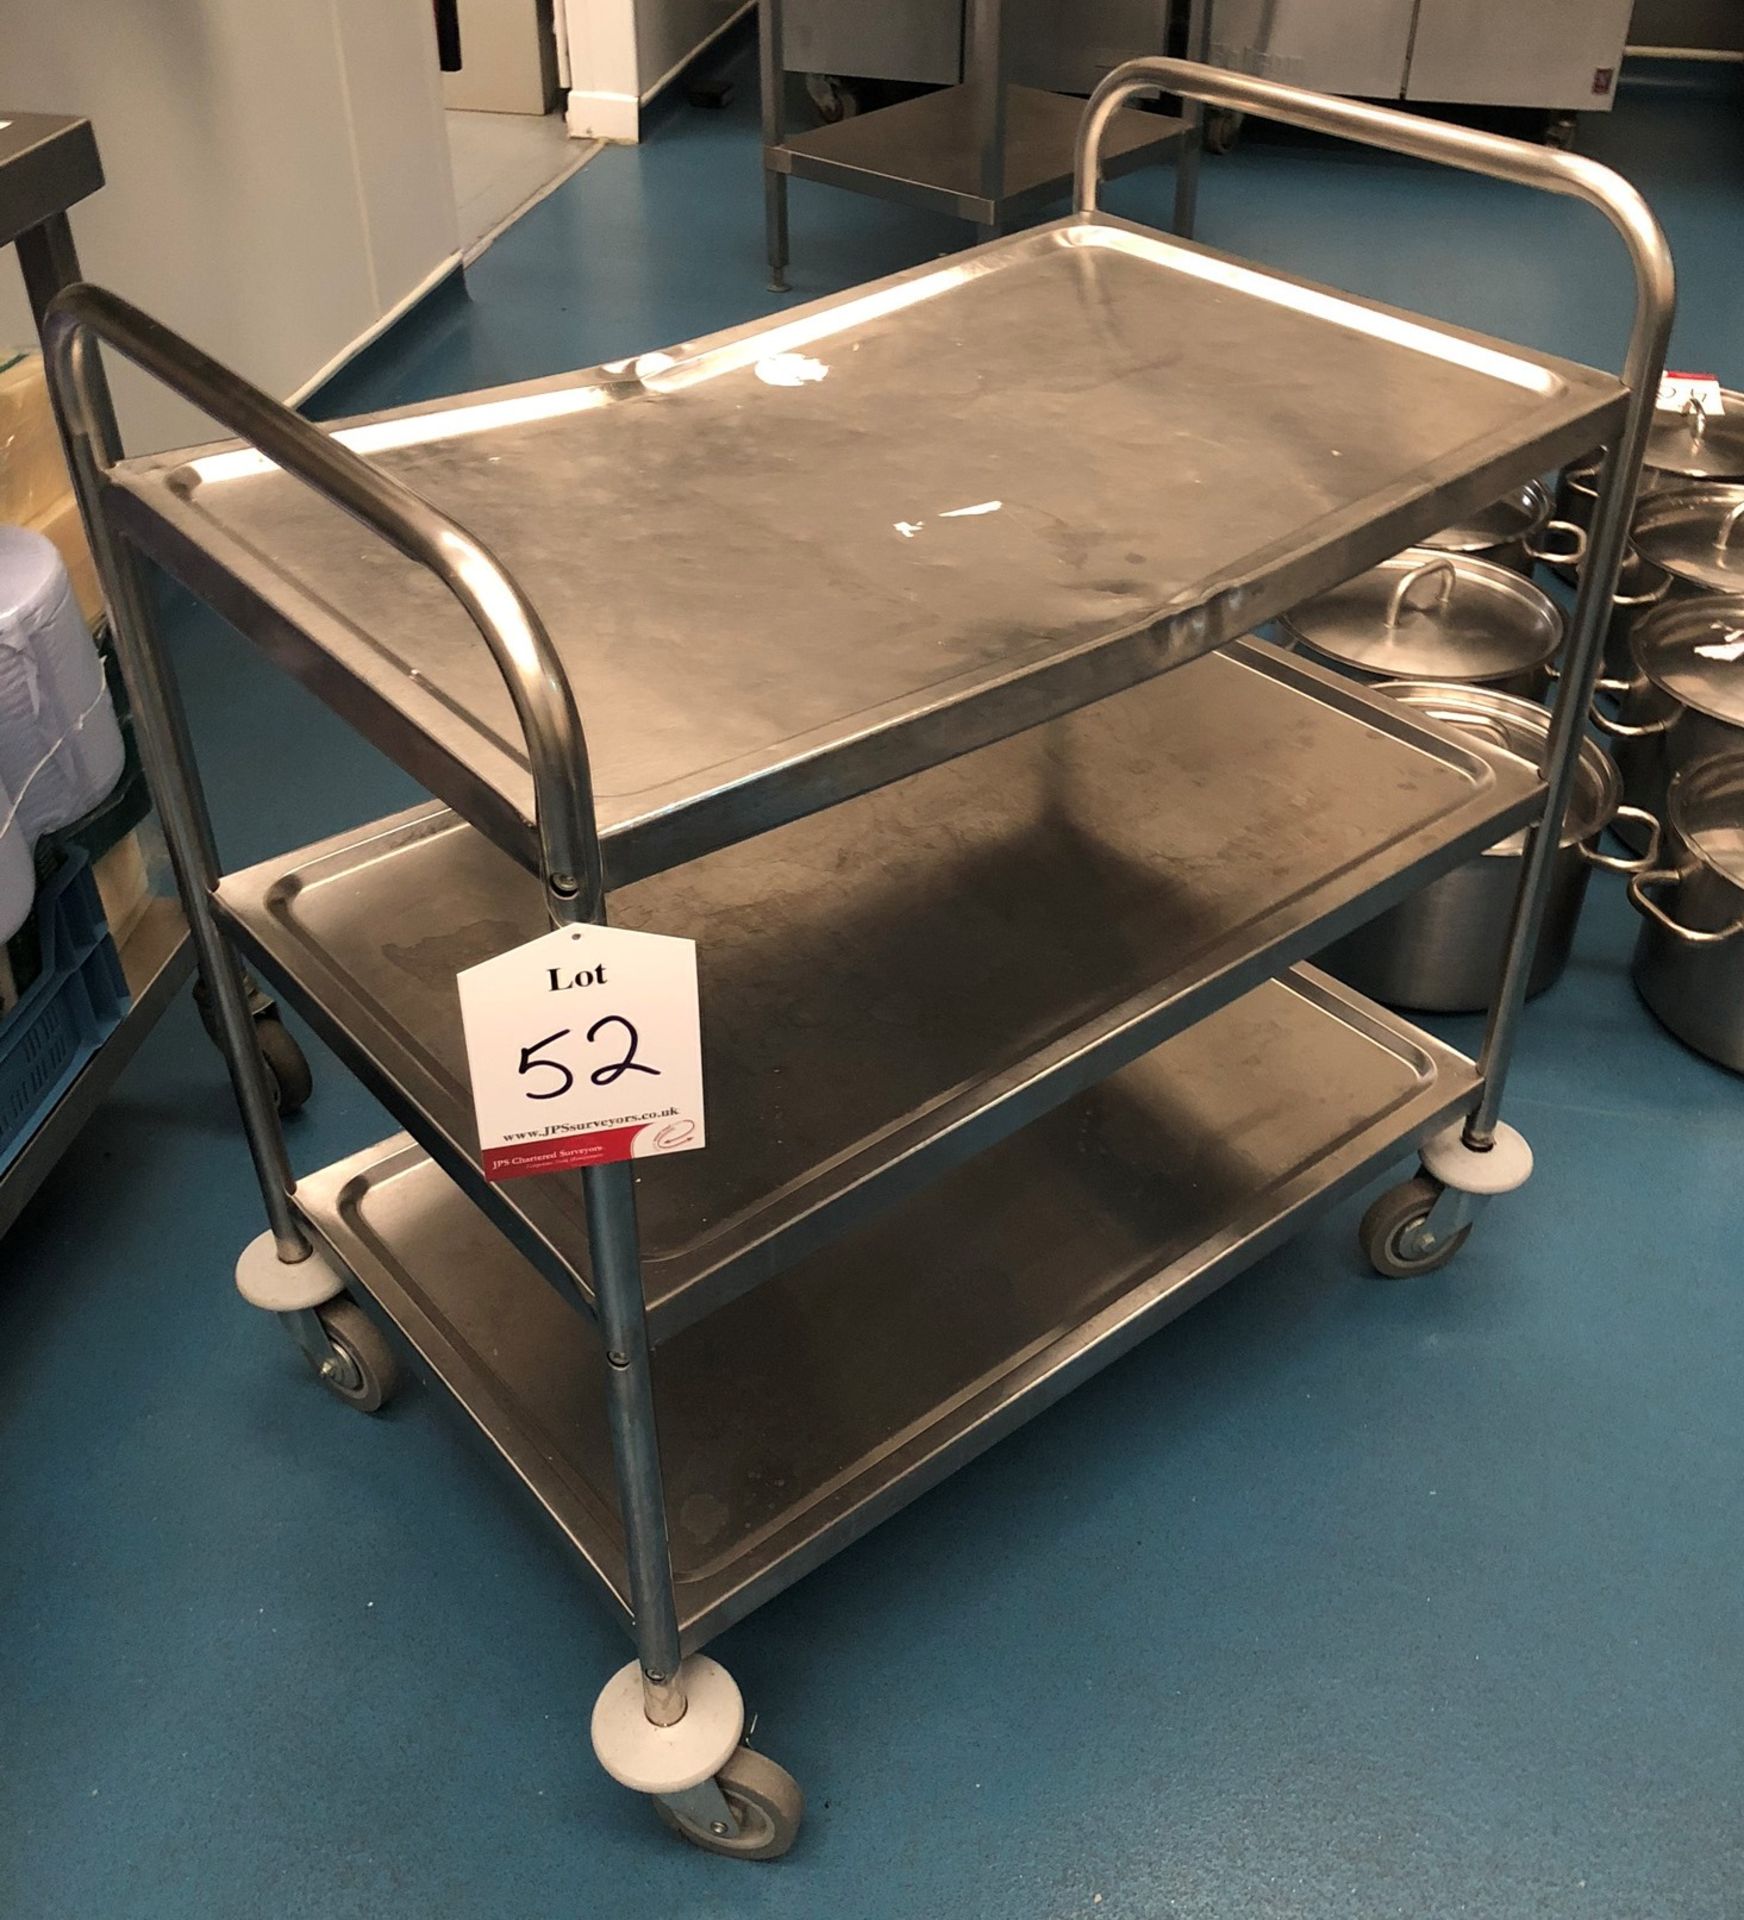 Stainless Steel 3 Tier Mobile Serving Trolley